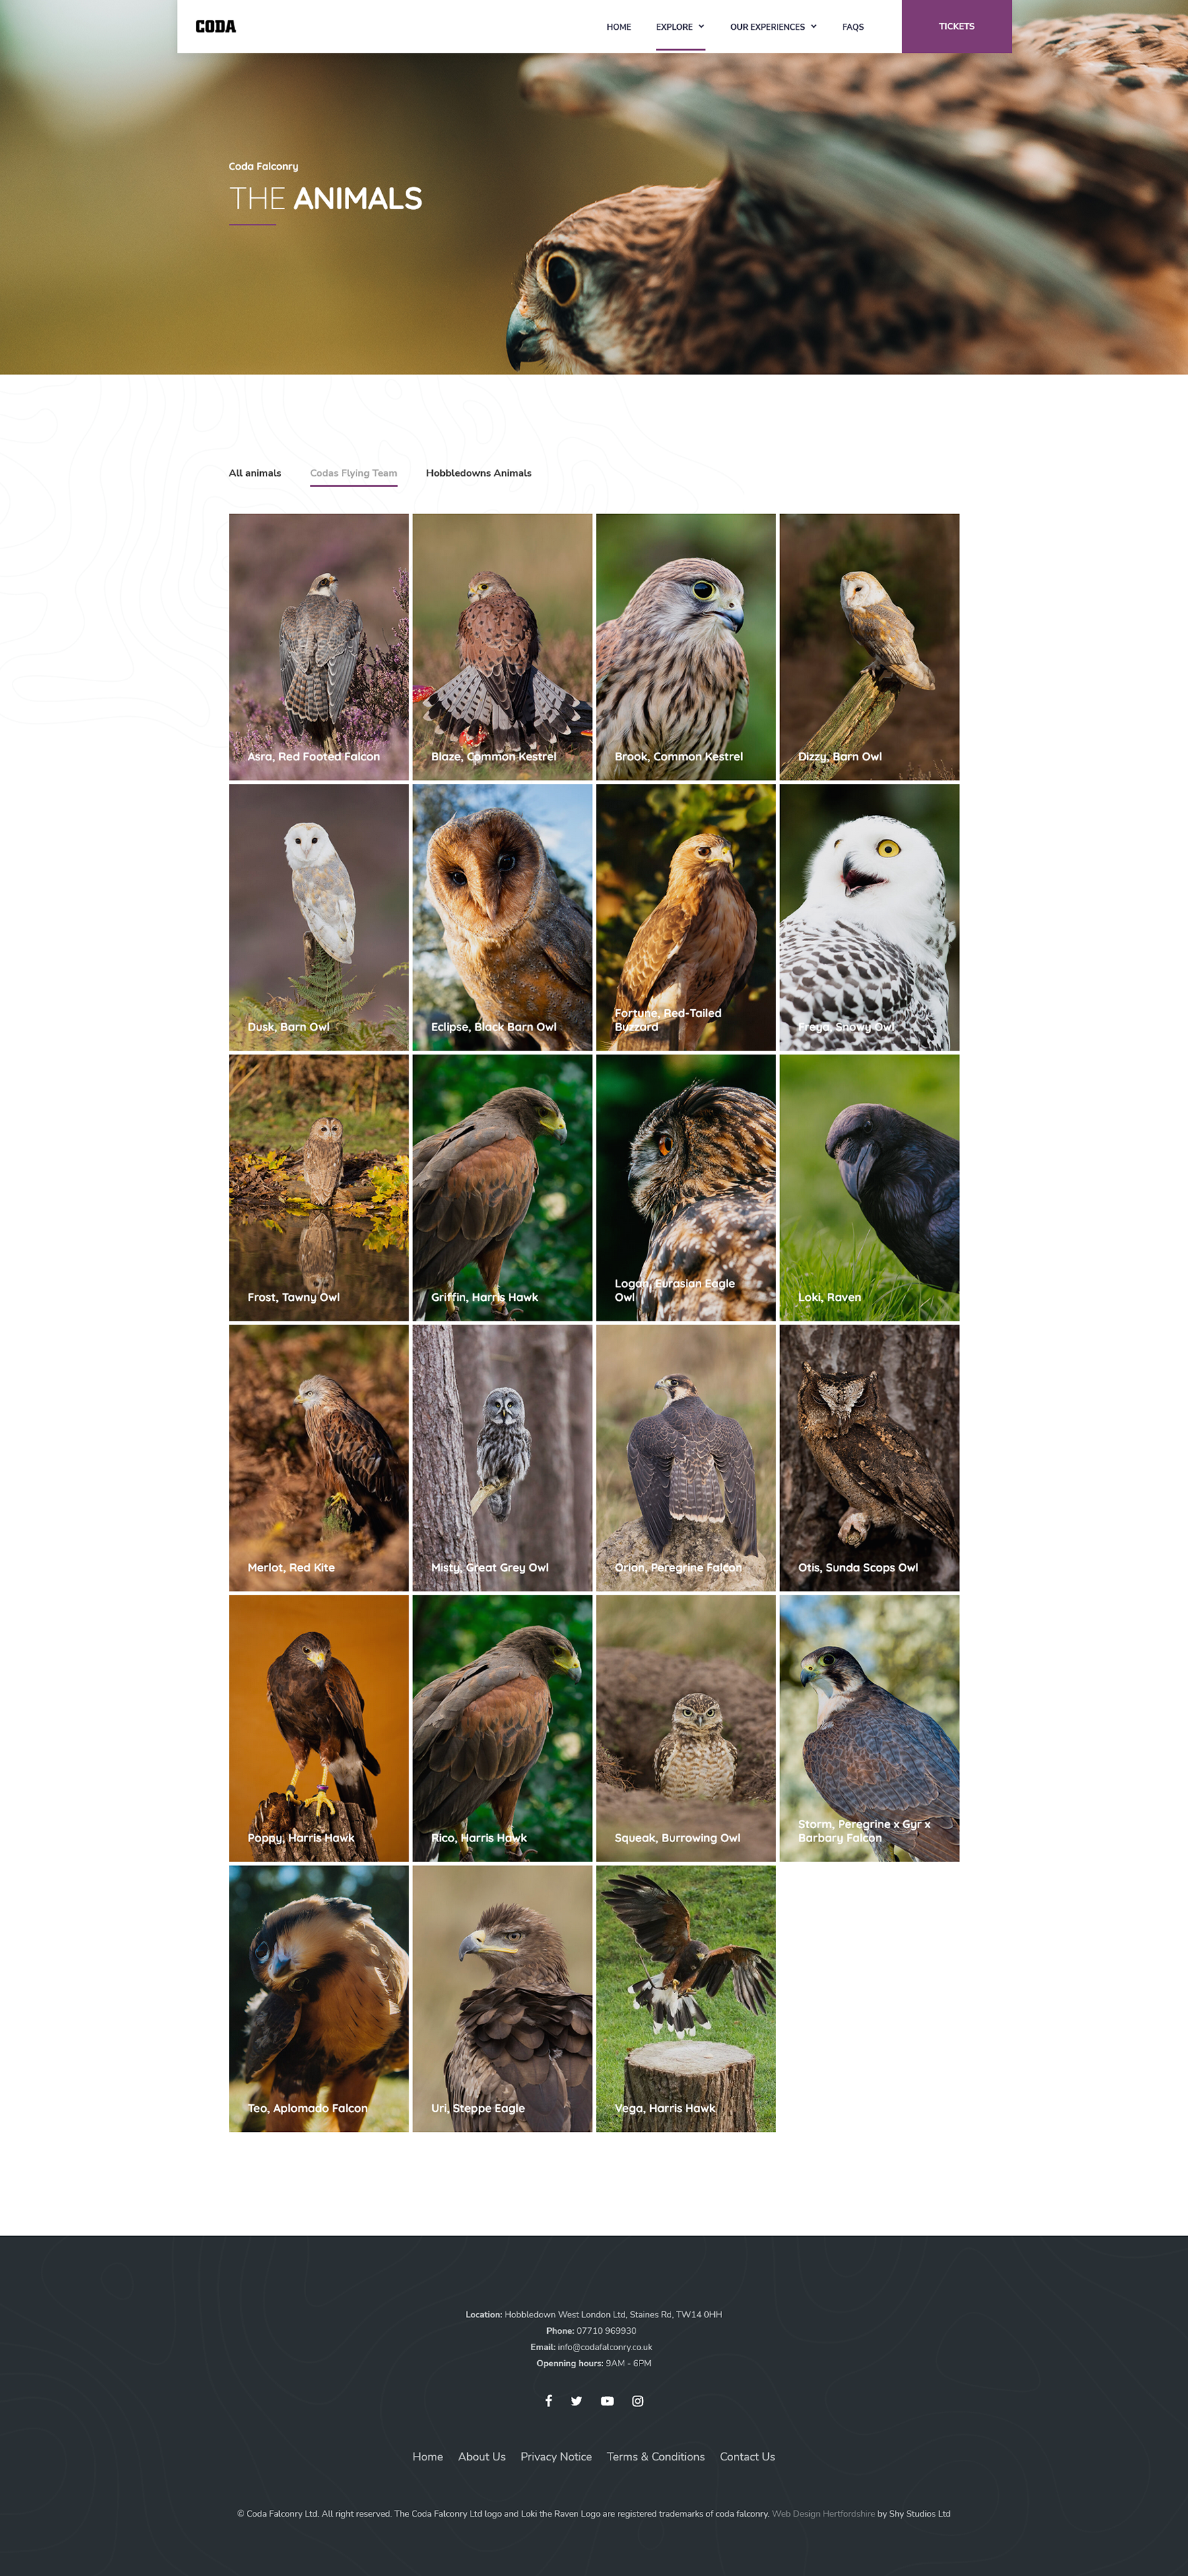 Meet the animals webpage design for Coda Falconry.